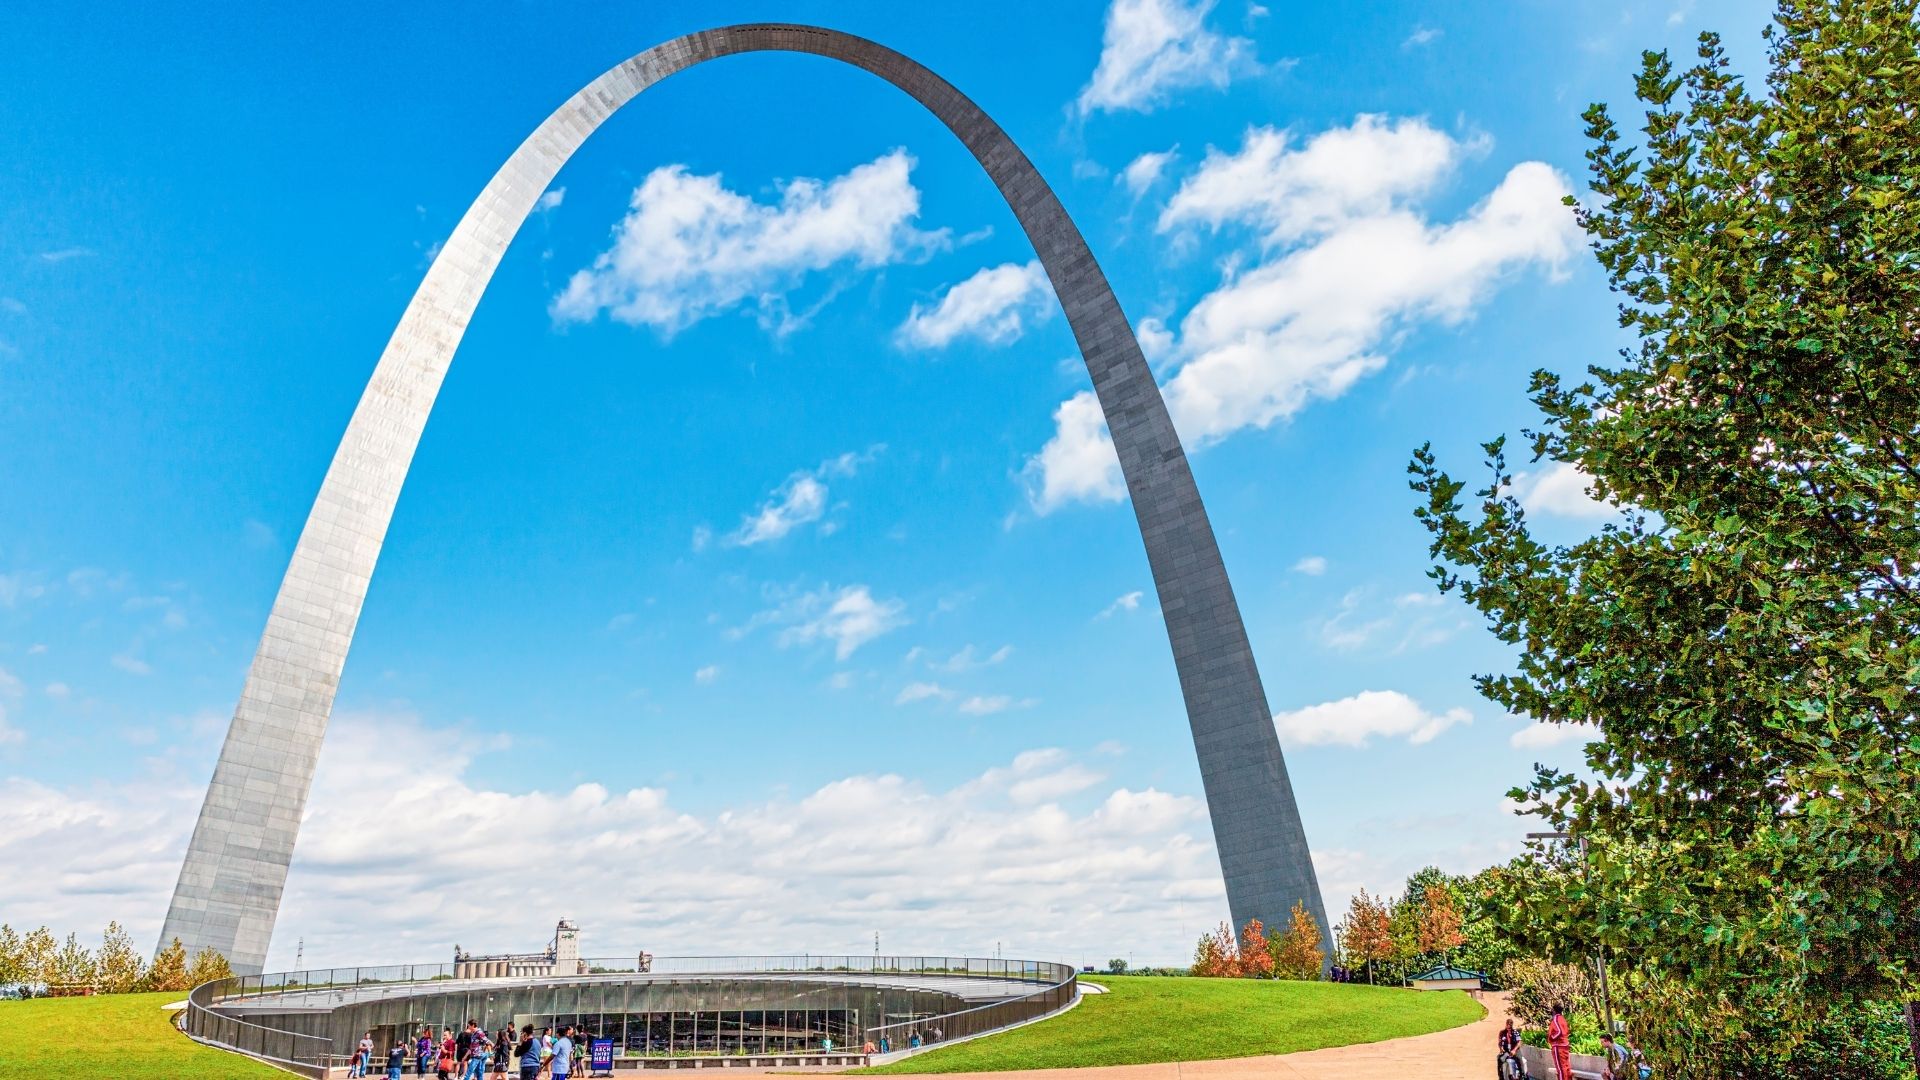 The Gateway Arch is a modern engineering marvel – and one of the most unique STEAM activities in St. Louis.